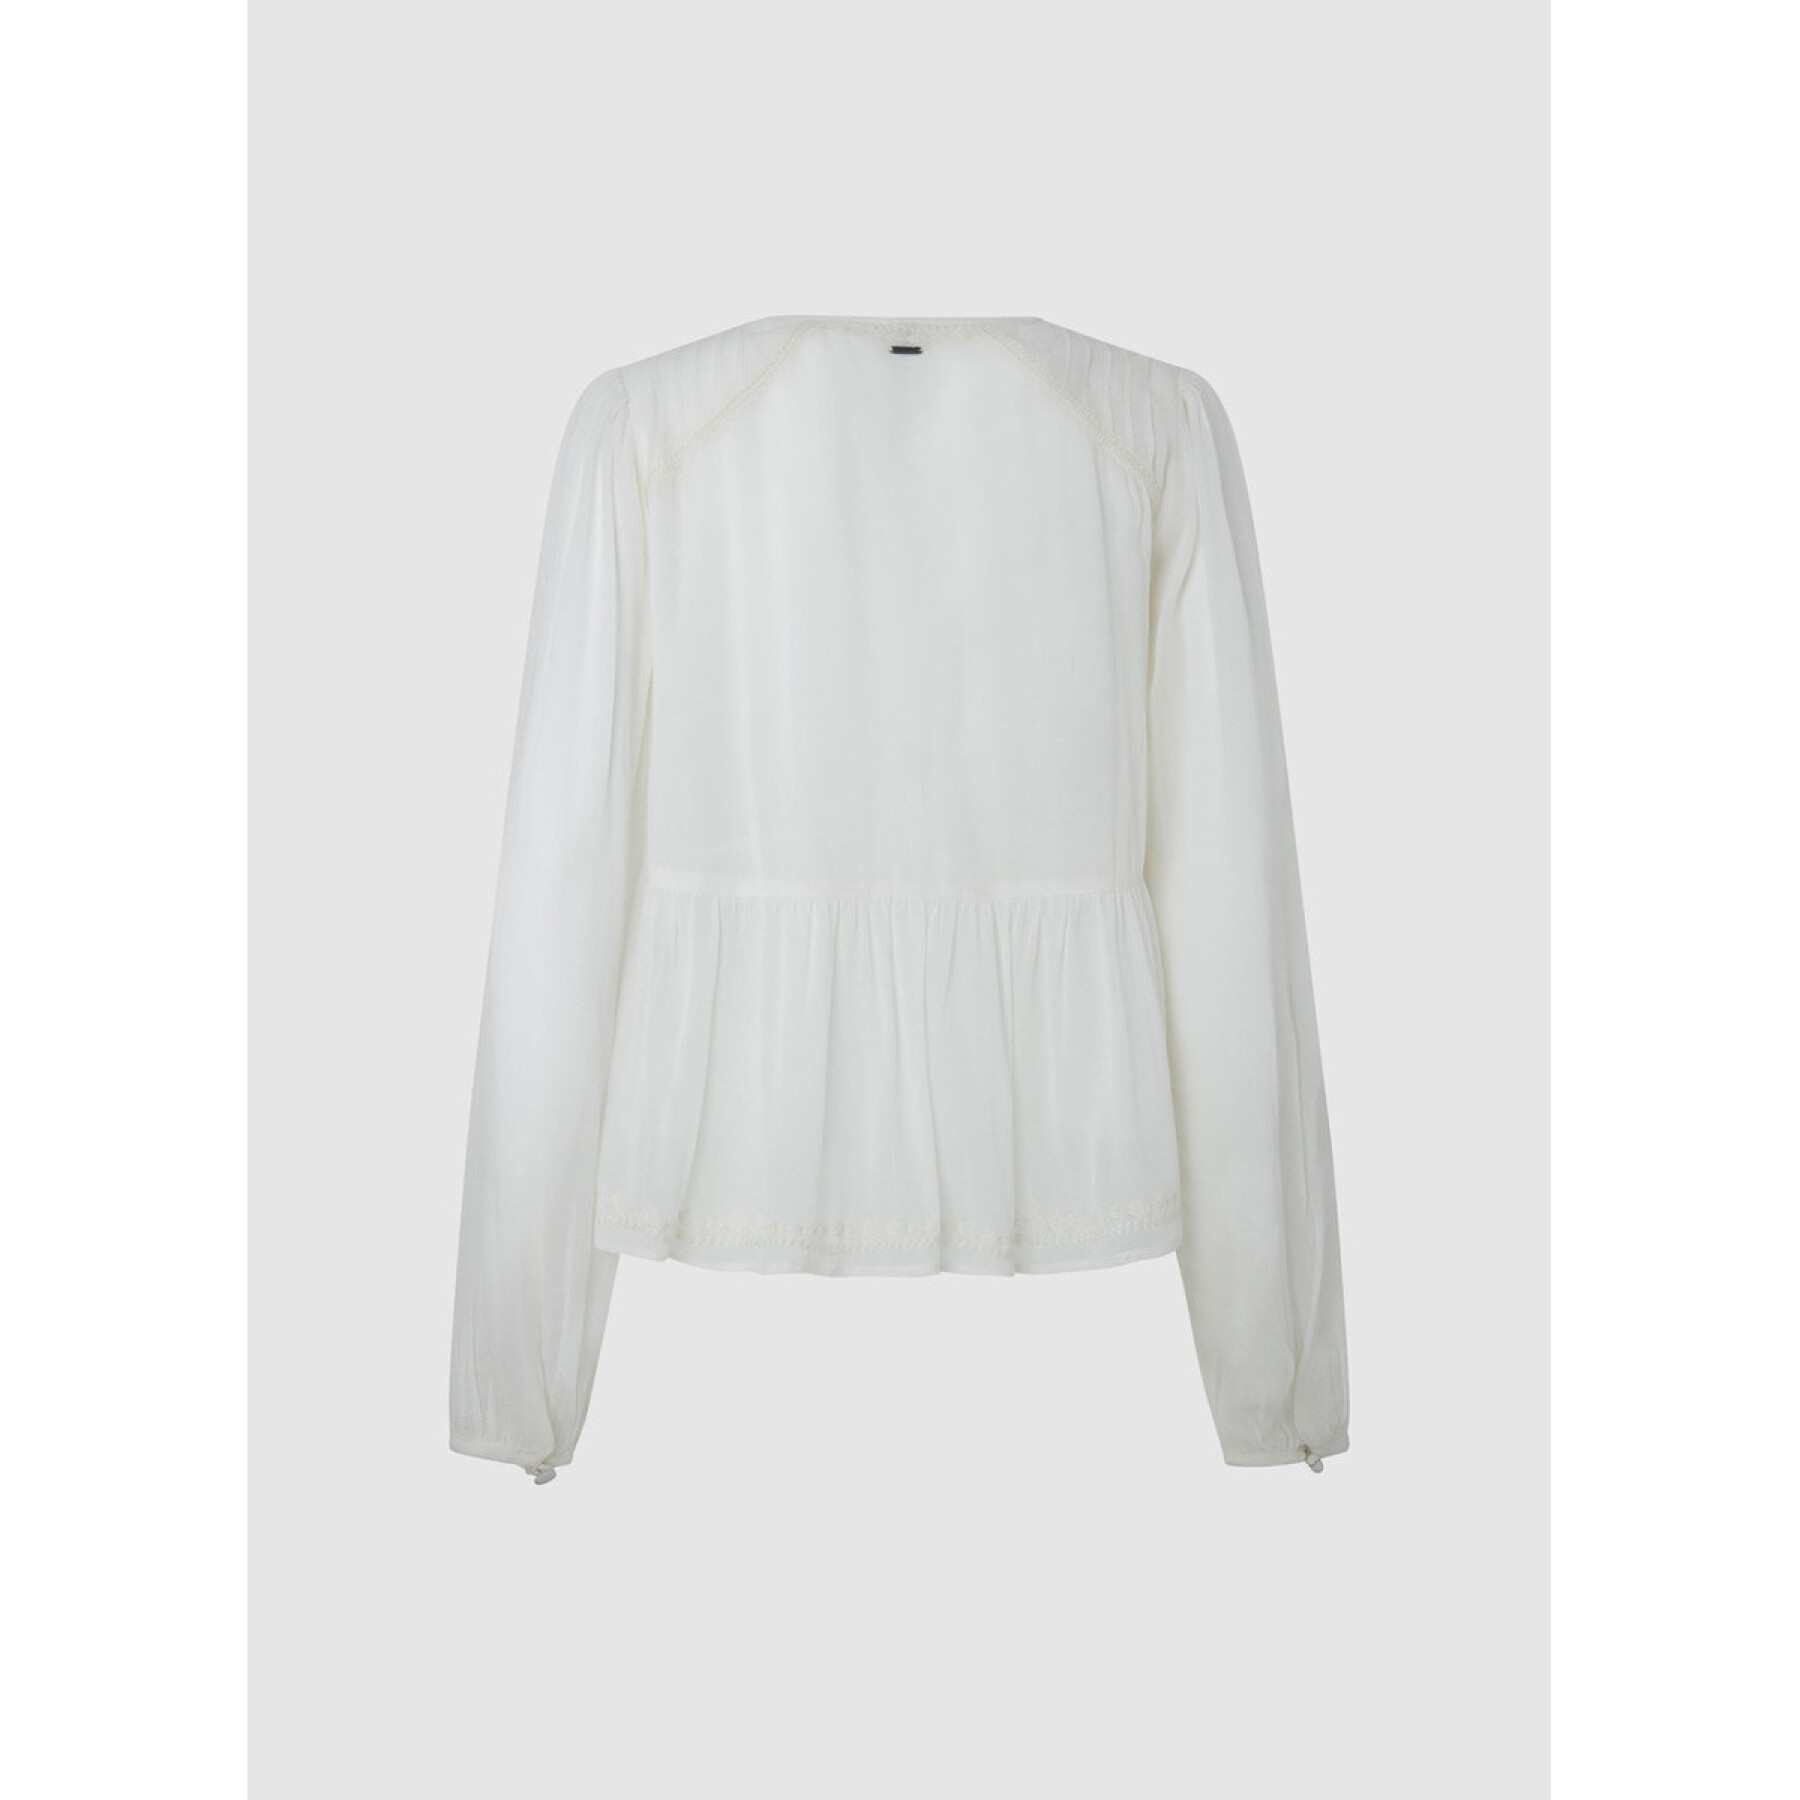 Vrouwenblouse Pepe Jeans Brianna